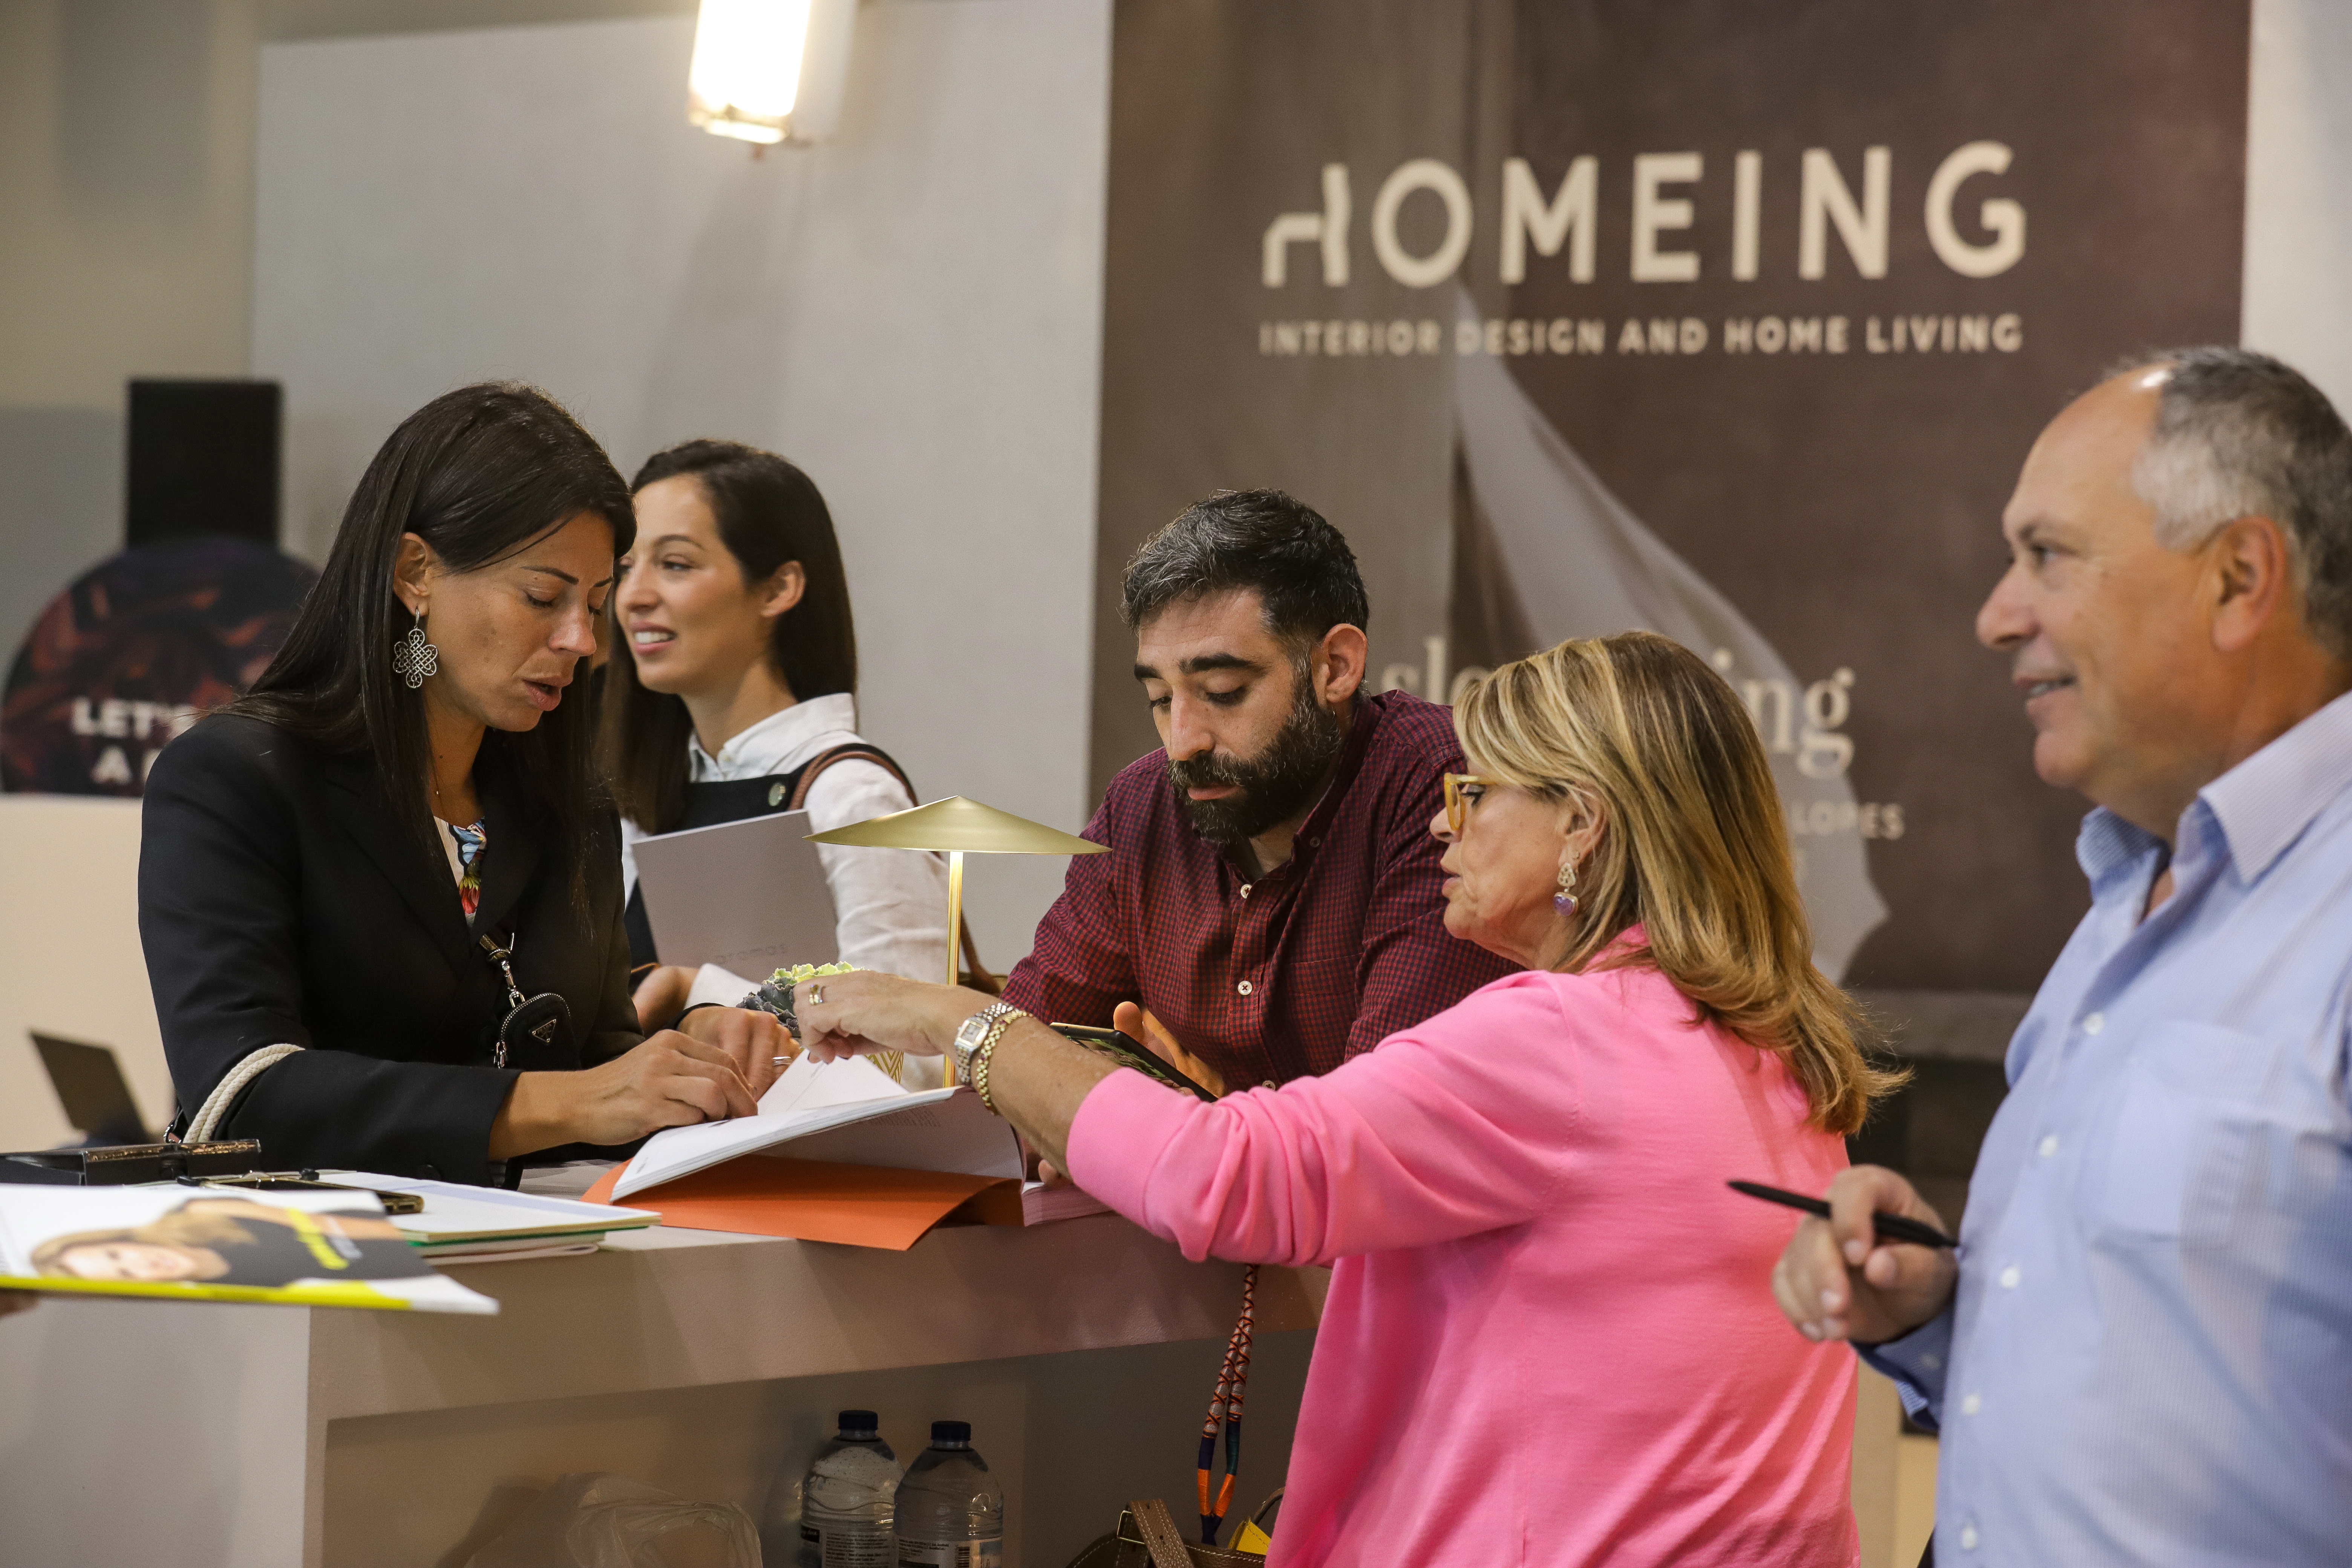 Homeing opens doors to present the latest in architecture and interior design